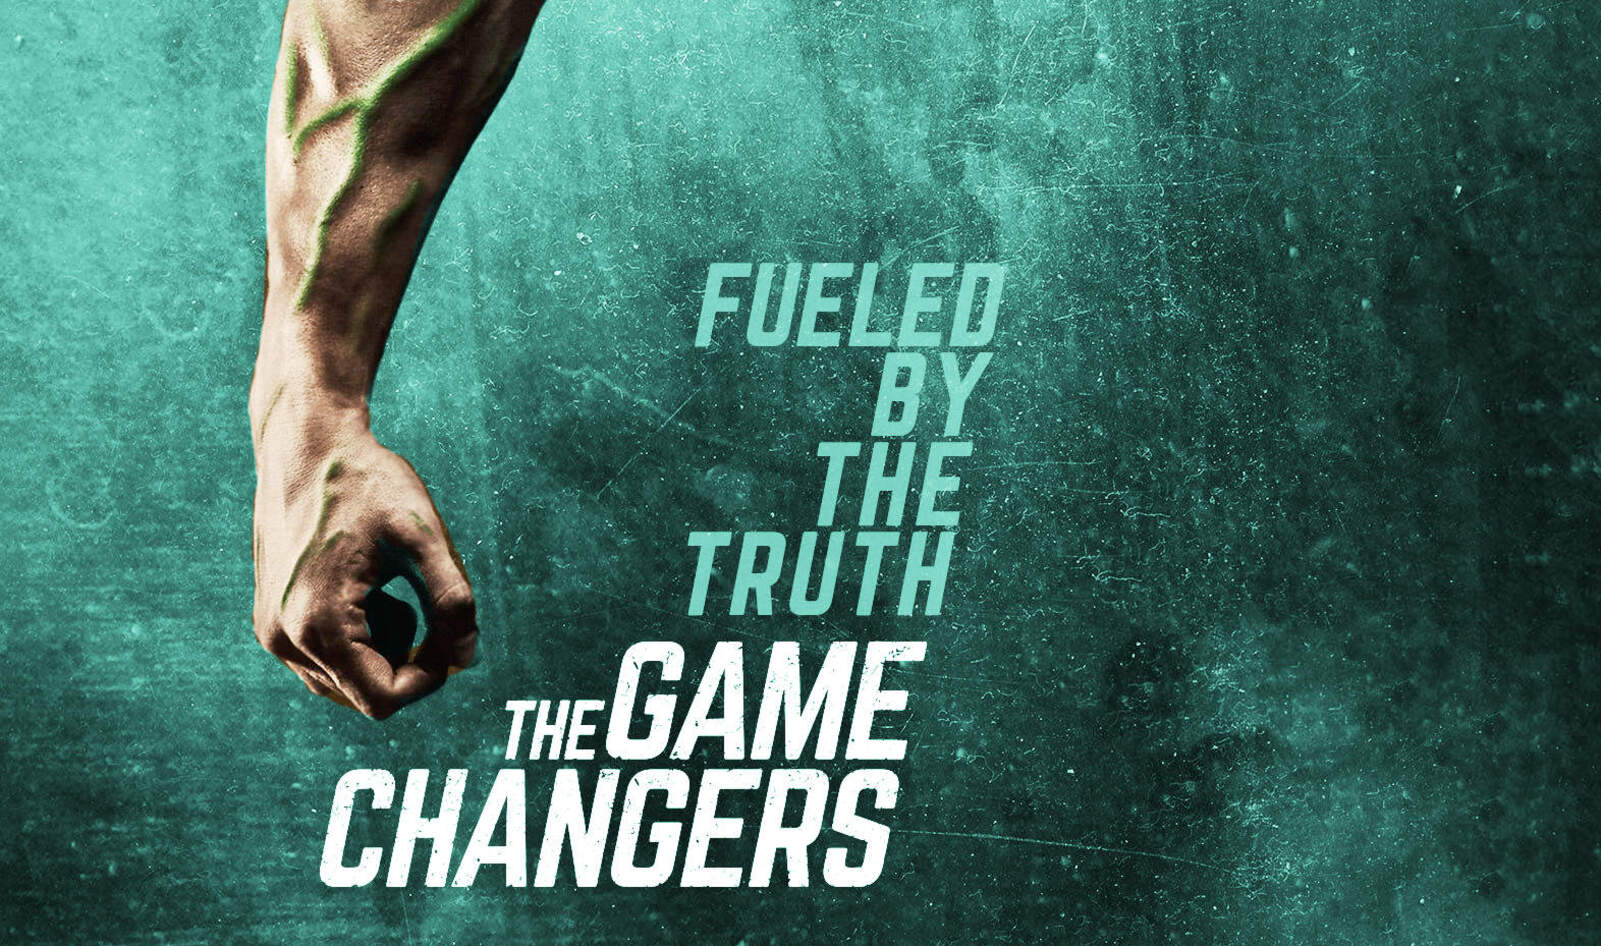 Vegan Documentary <i>The Game Changers</i> Makes Digital Debut Next Month